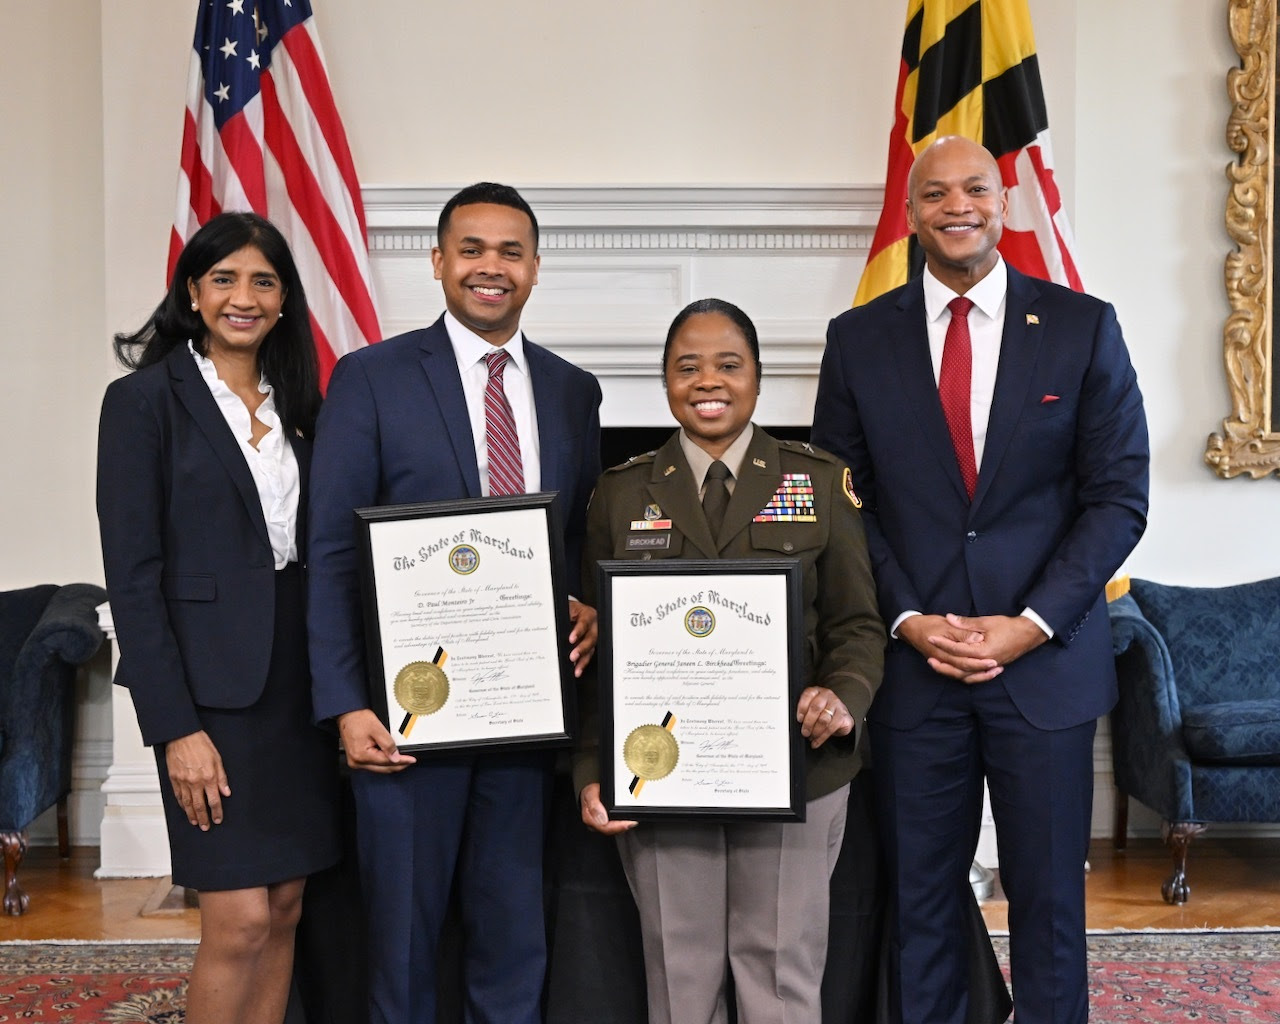 Governor Moore and Lt. Governor Miller swore in Paul Monteiro as Department of Service and Civic Innovation Secretary and Brigadier General Janeen Birckhead as the 31st Adjutant General of Maryland.